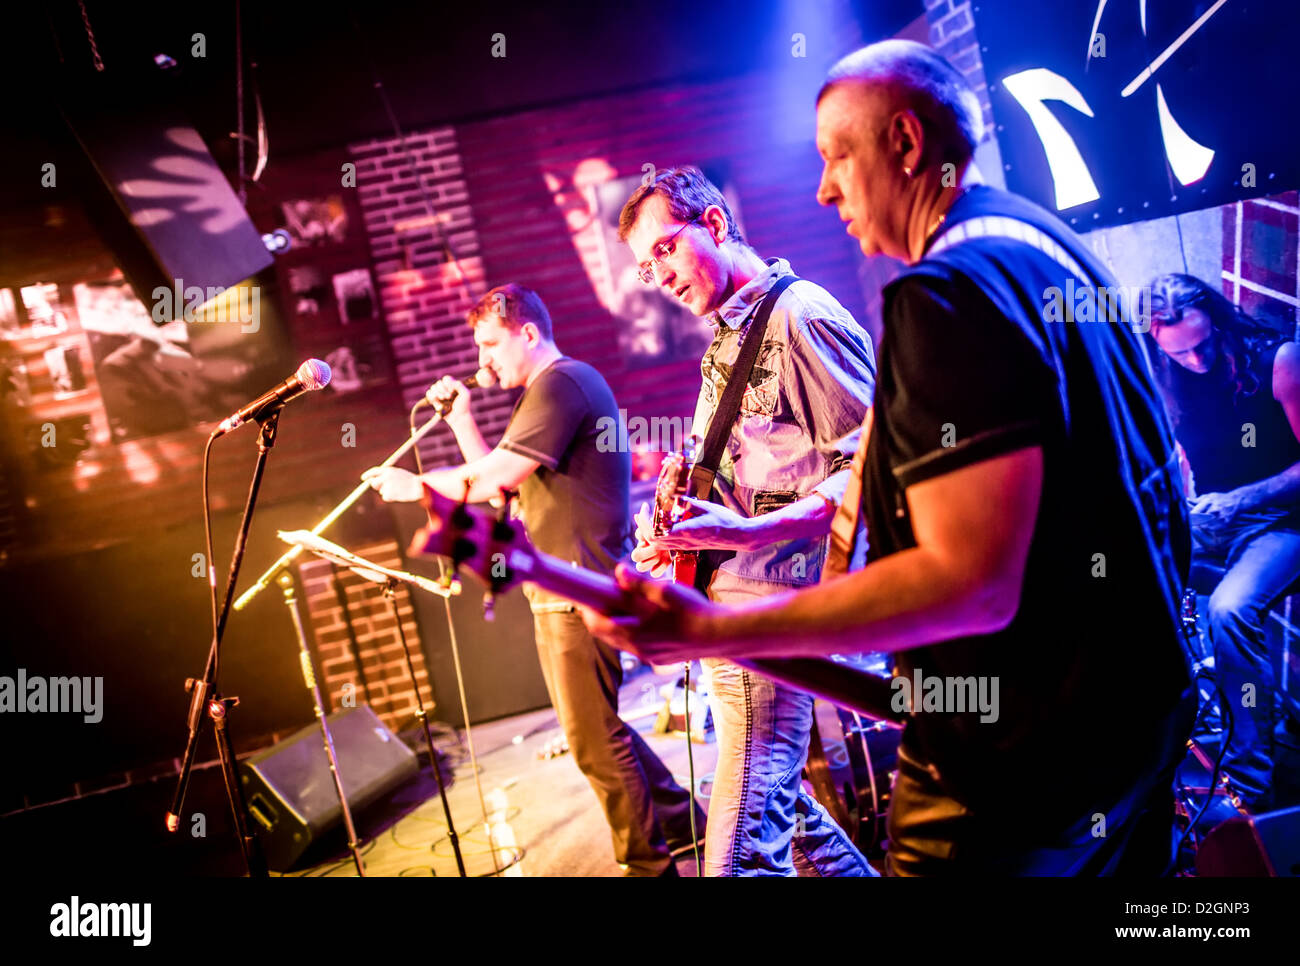 Band performs on stage, rock music Stock Photo